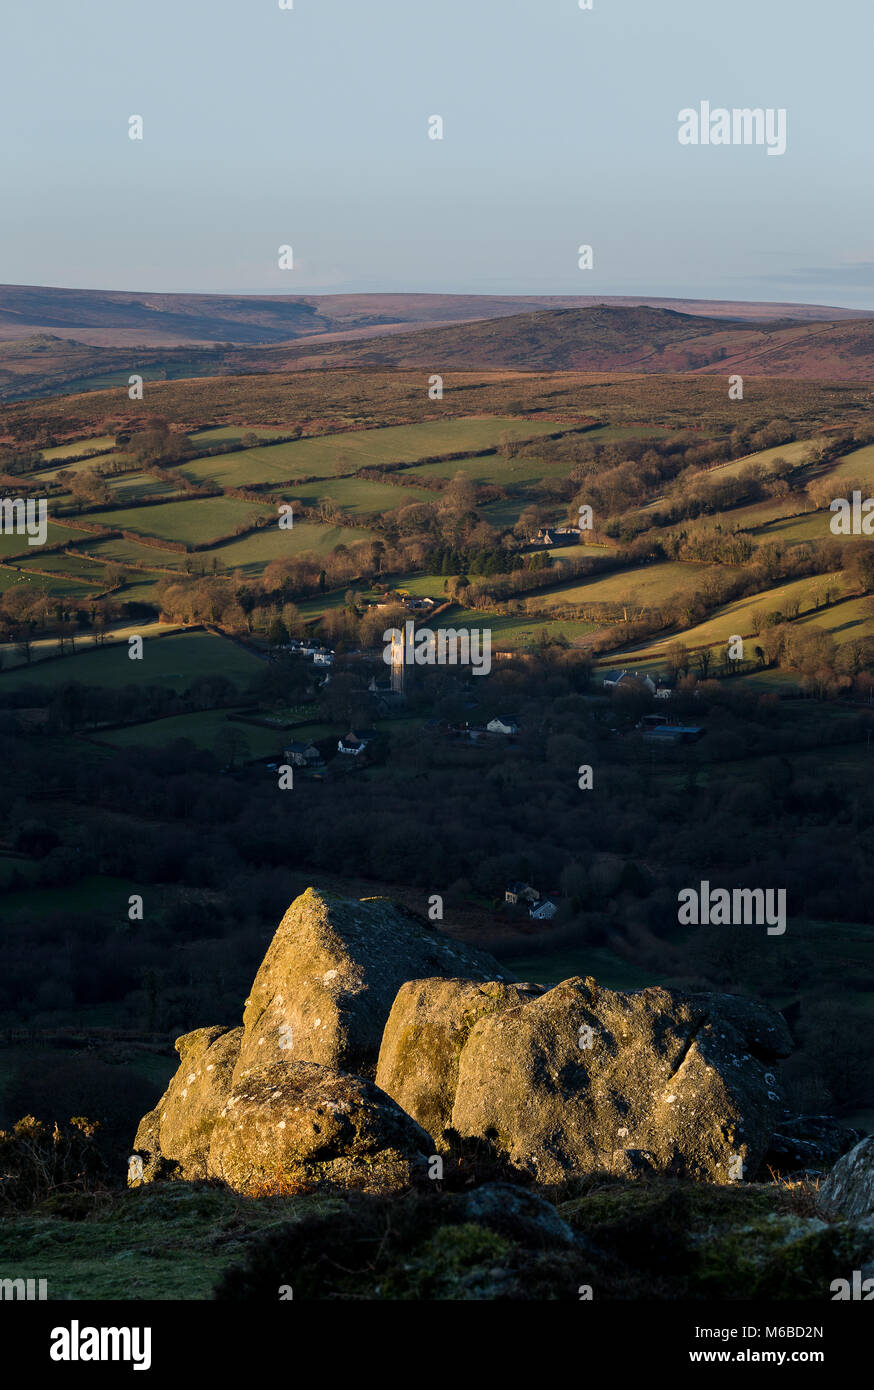 Widecombe in the moor from Bonehill rocks, Dartmoor National Park with The church of St Pancras in the distance known as 'Cathedral of the Moors' Stock Photo